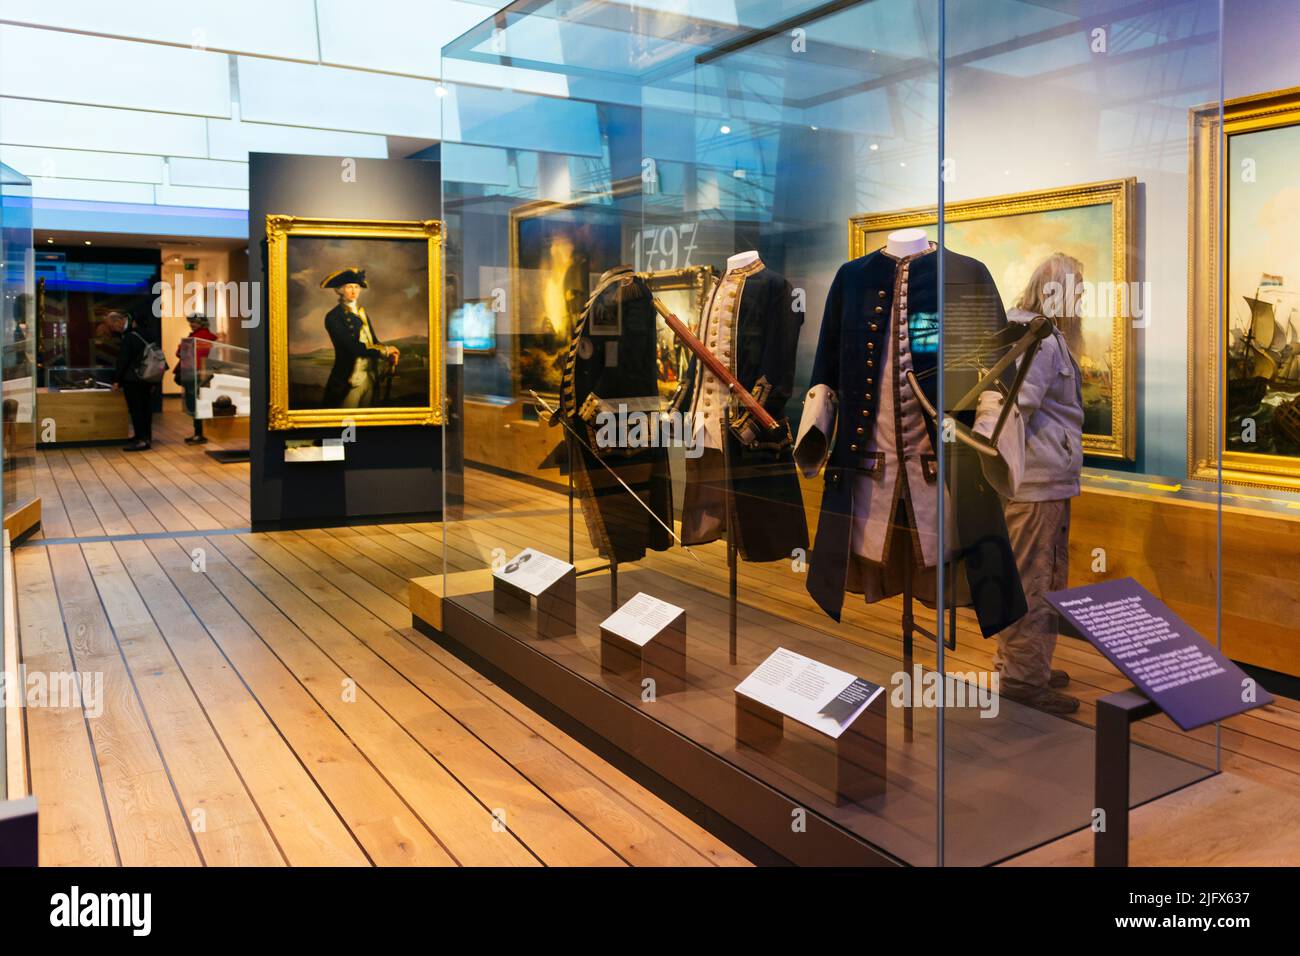 Exhibition room. The National Maritime Museum, NMM, is a maritime museum in Greenwich, London. It is part of Royal Museums Greenwich, a network of mus Stock Photo